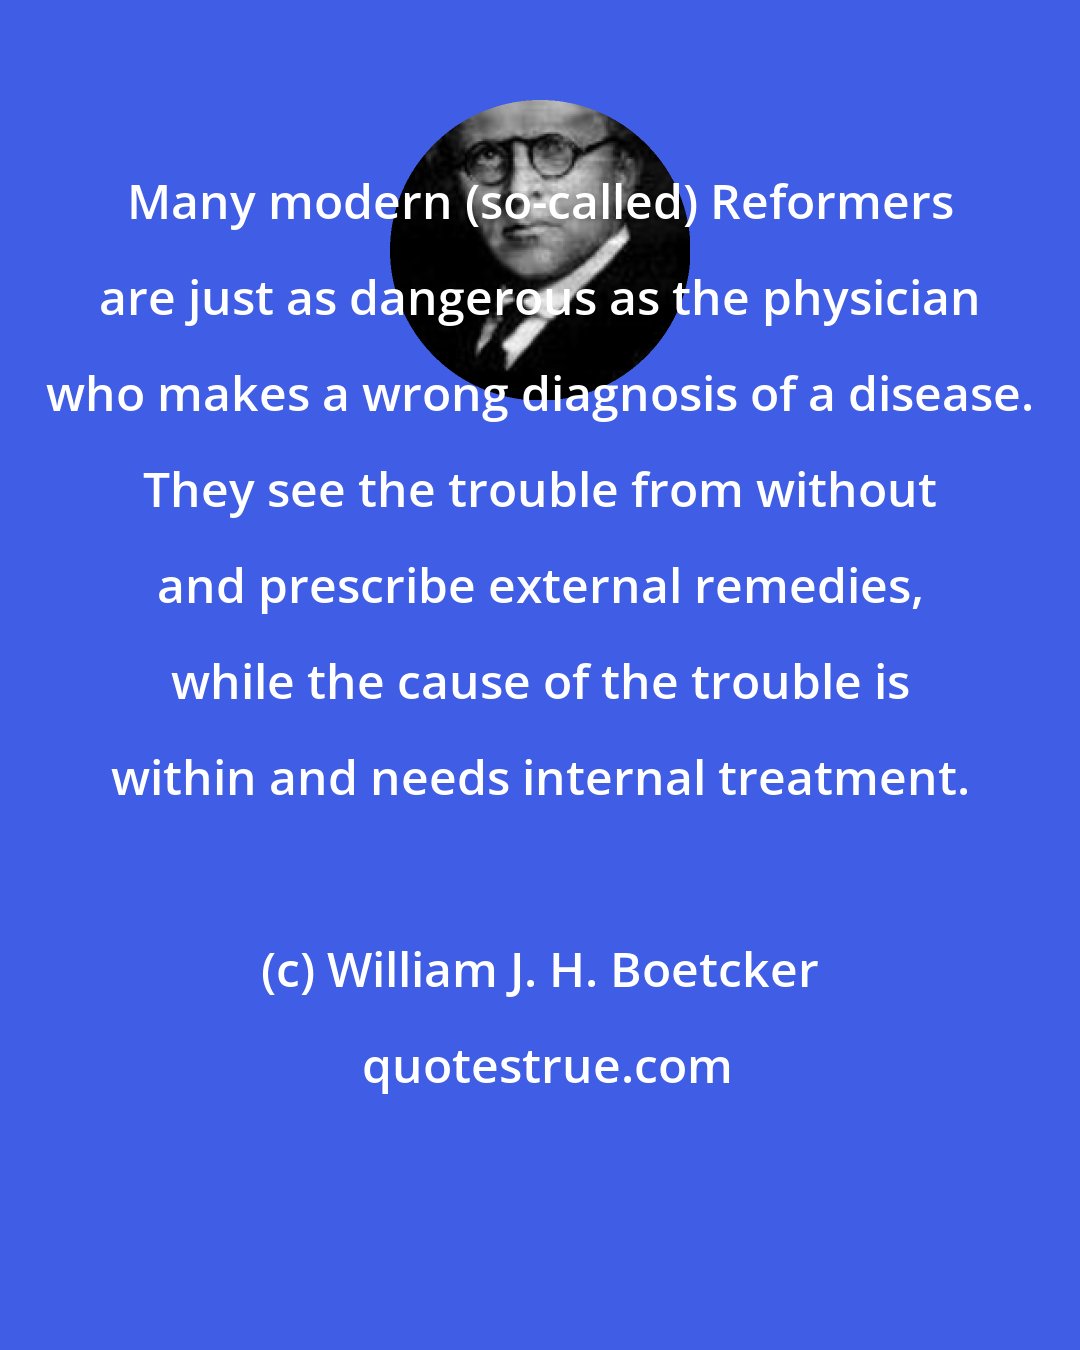 William J. H. Boetcker: Many modern (so-called) Reformers are just as dangerous as the physician who makes a wrong diagnosis of a disease. They see the trouble from without and prescribe external remedies, while the cause of the trouble is within and needs internal treatment.